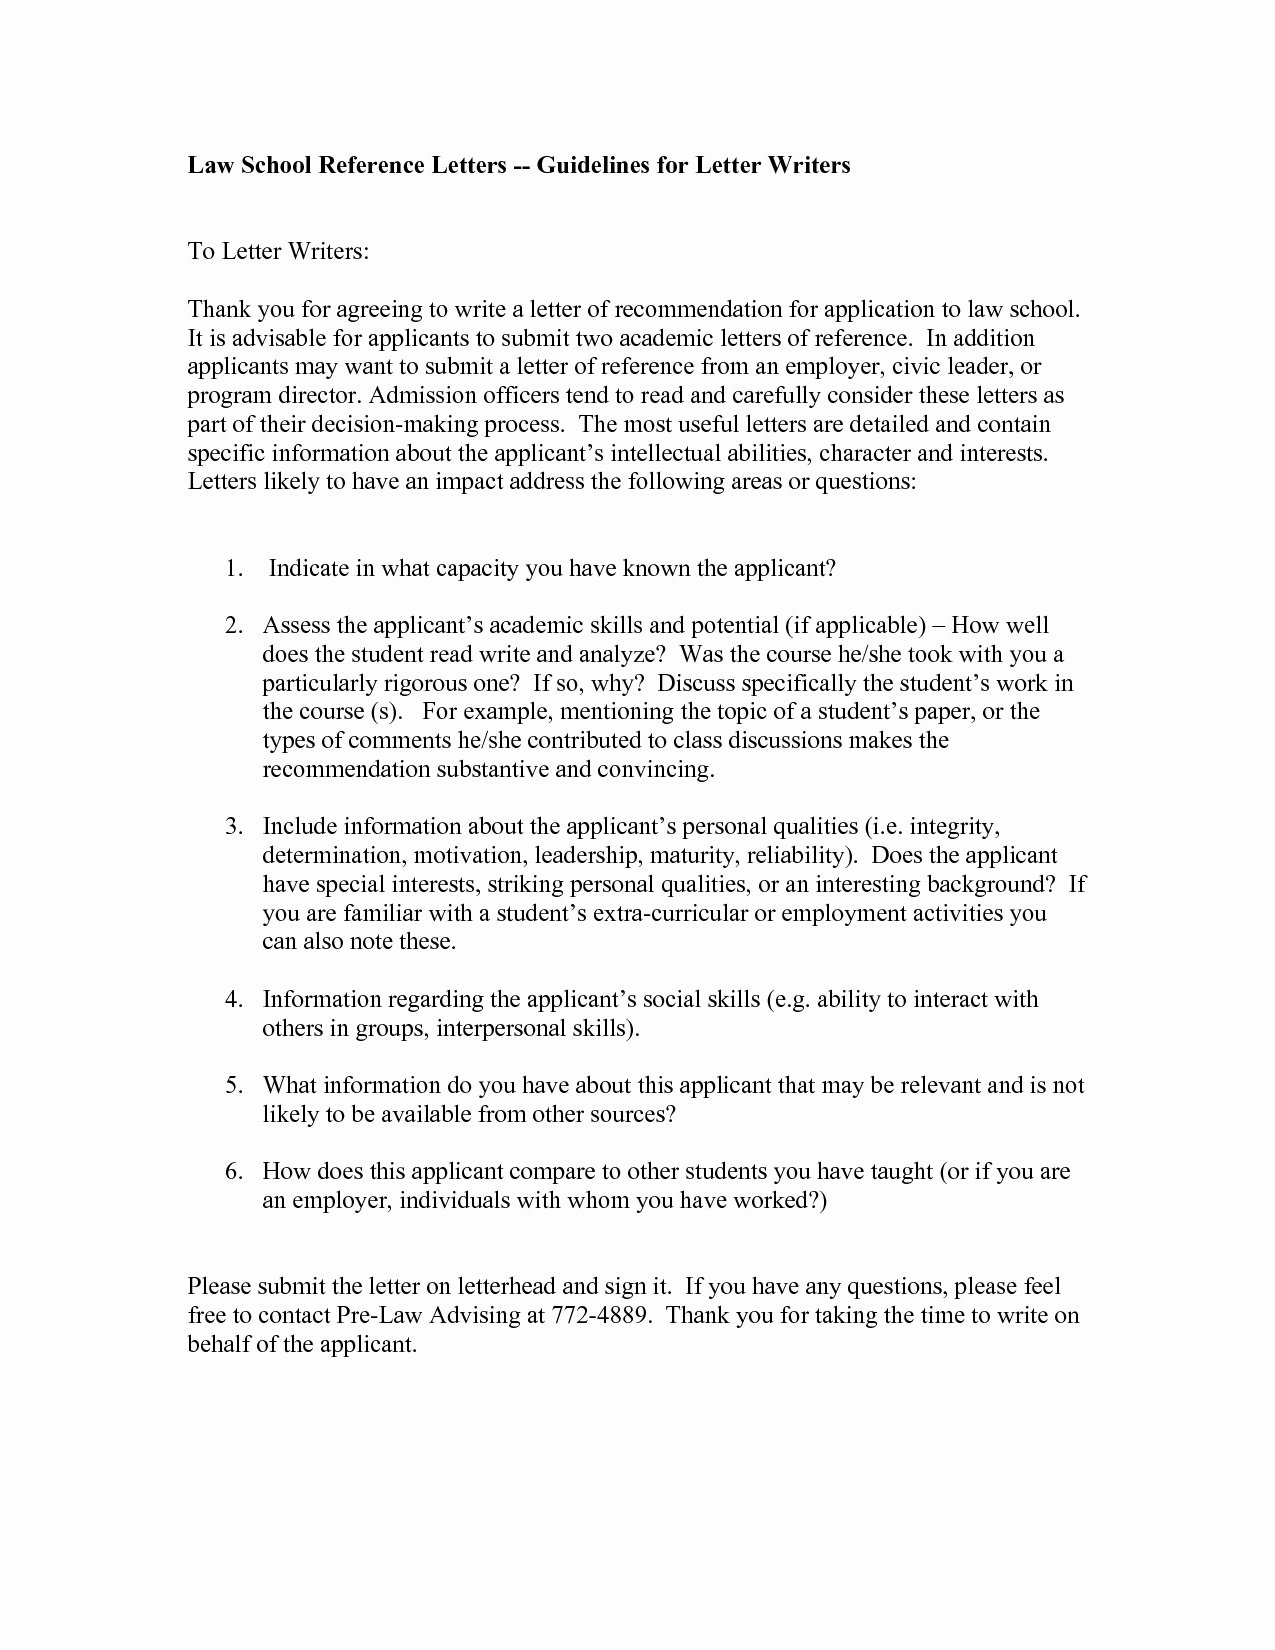 Law School Recommendation Letter Example Fresh Letter Re Mendation for Law School